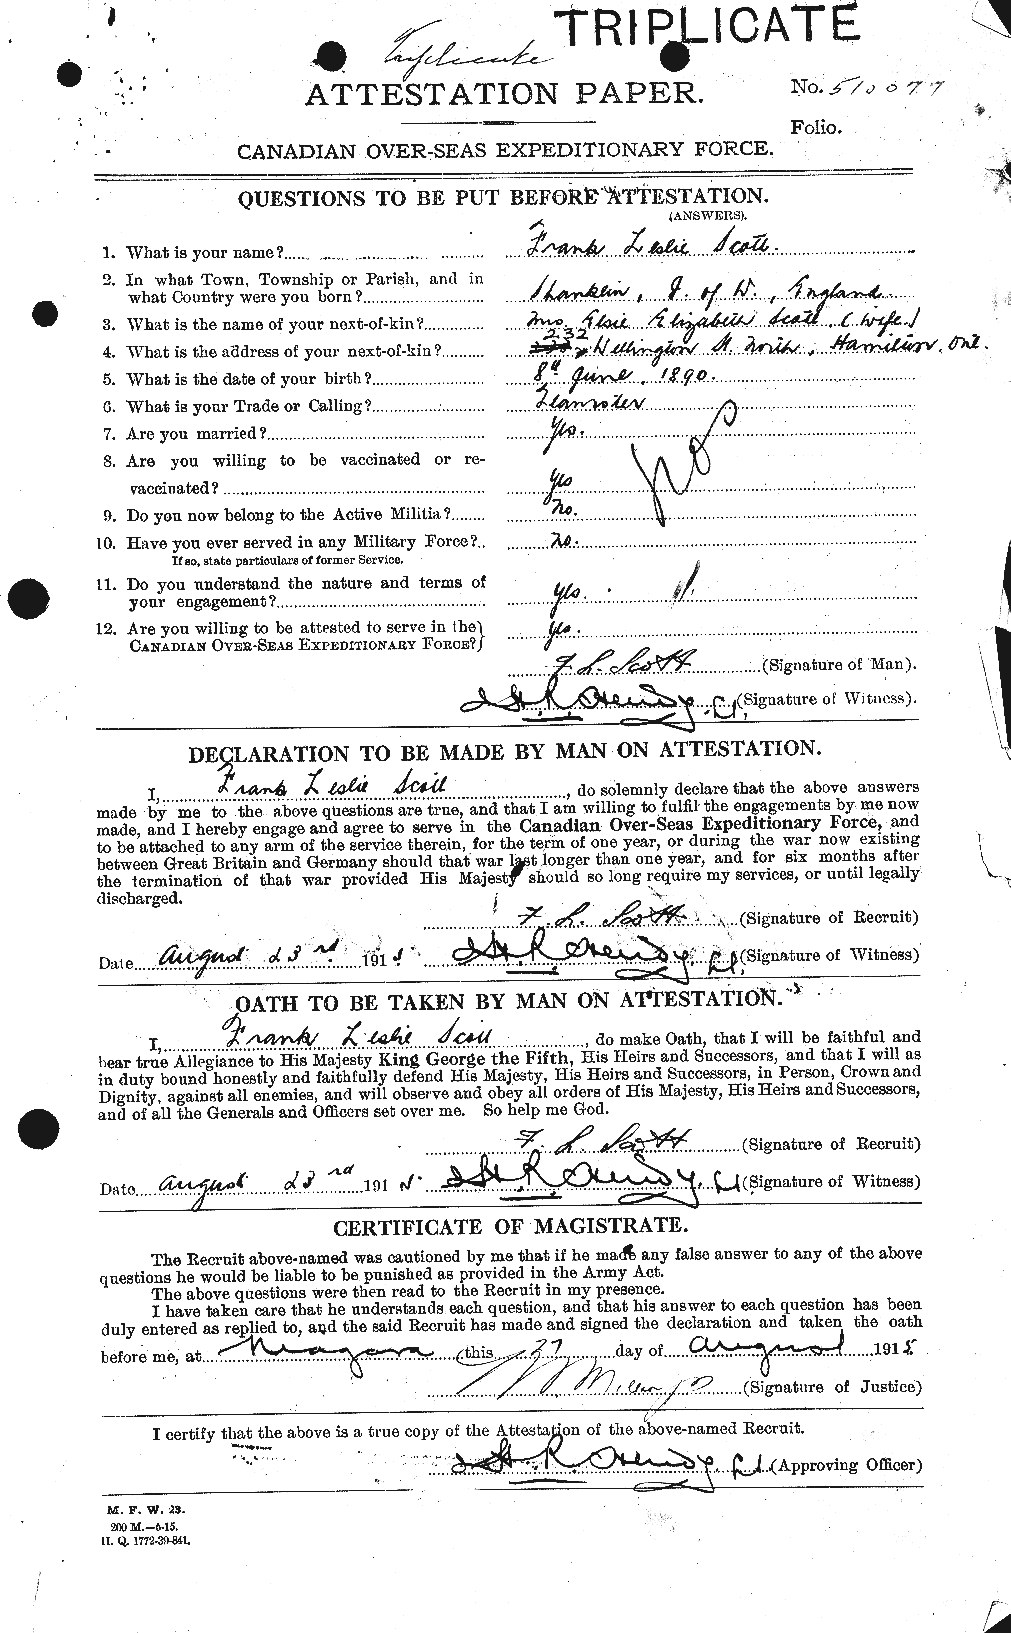 Personnel Records of the First World War - CEF 084699a